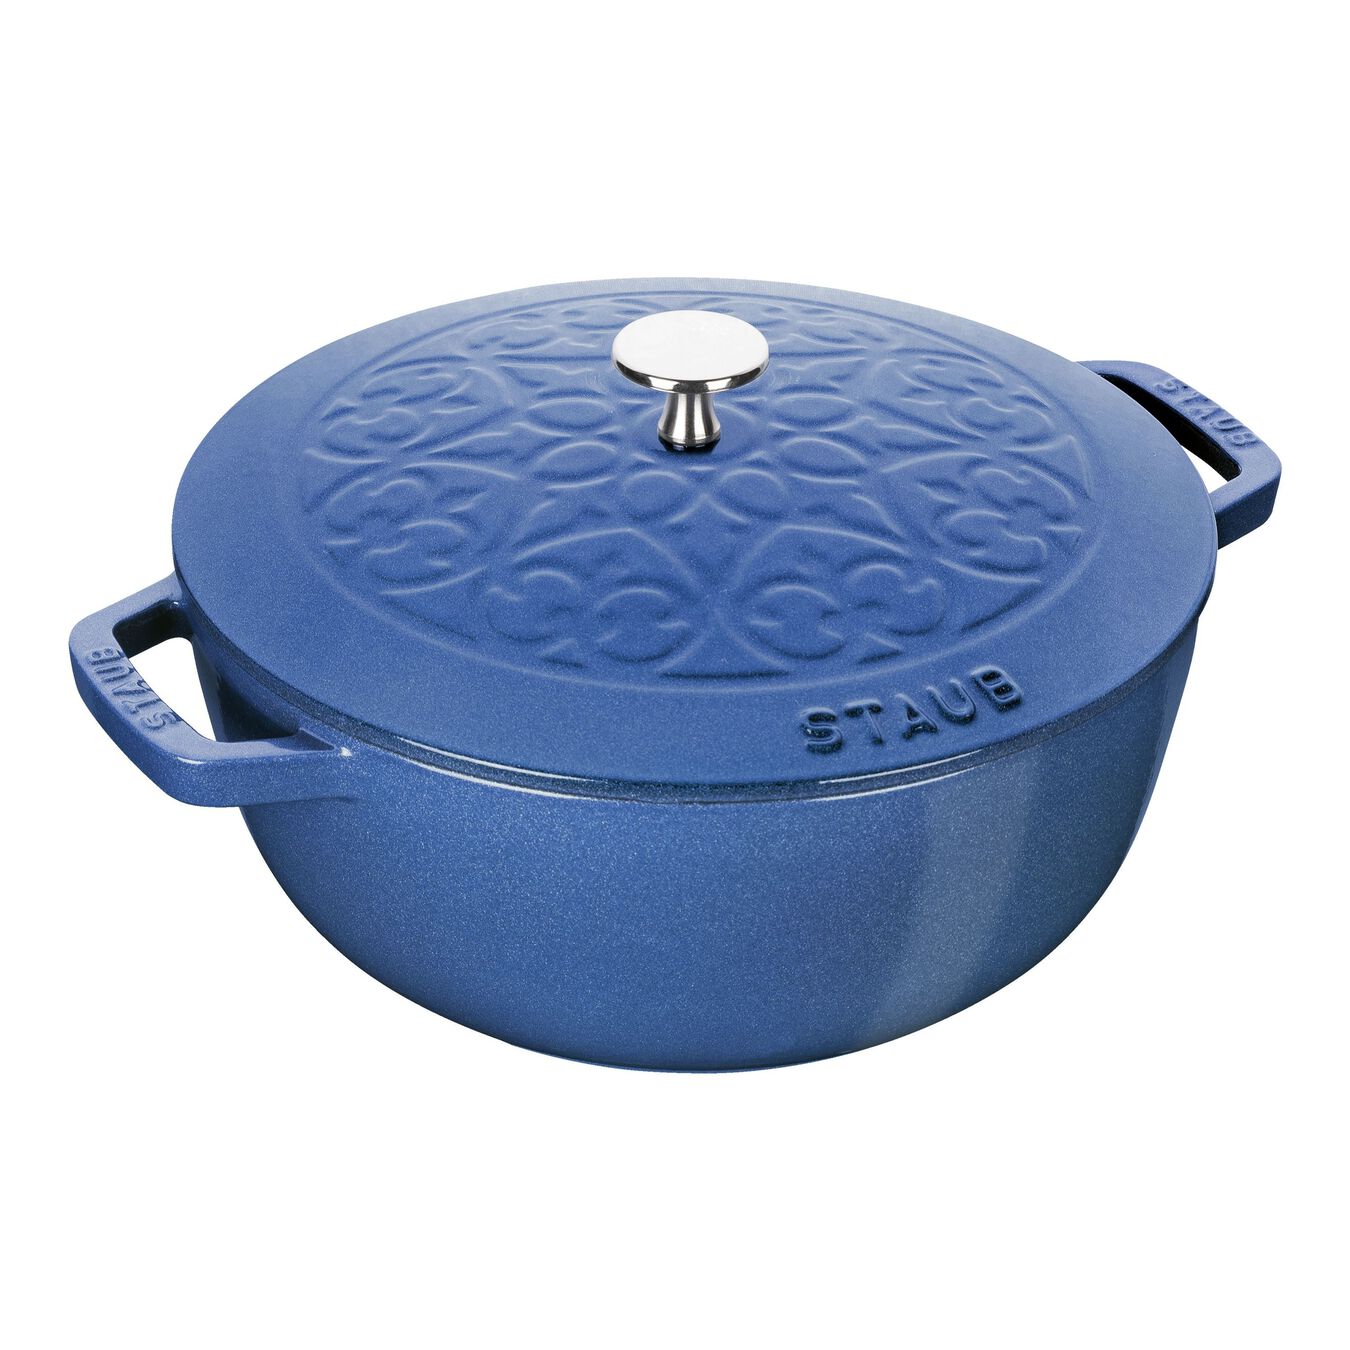 3.75 qt, French oven, metallic blue,,large 1